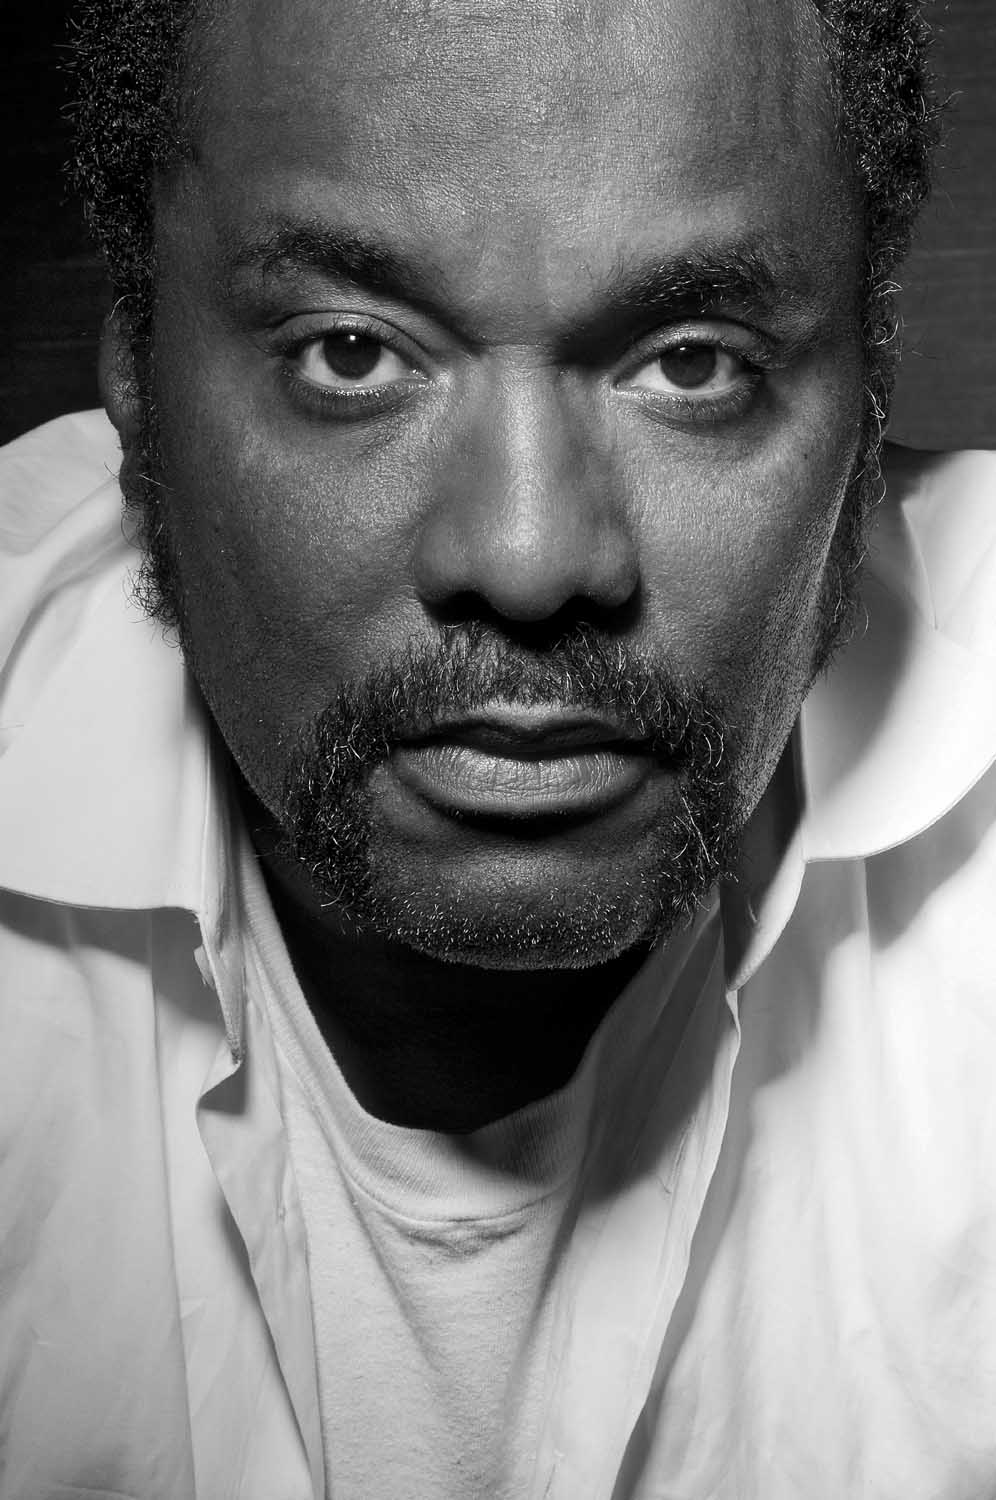 Director Lee Daniels on What it Took to Make The Butler – Below the Line